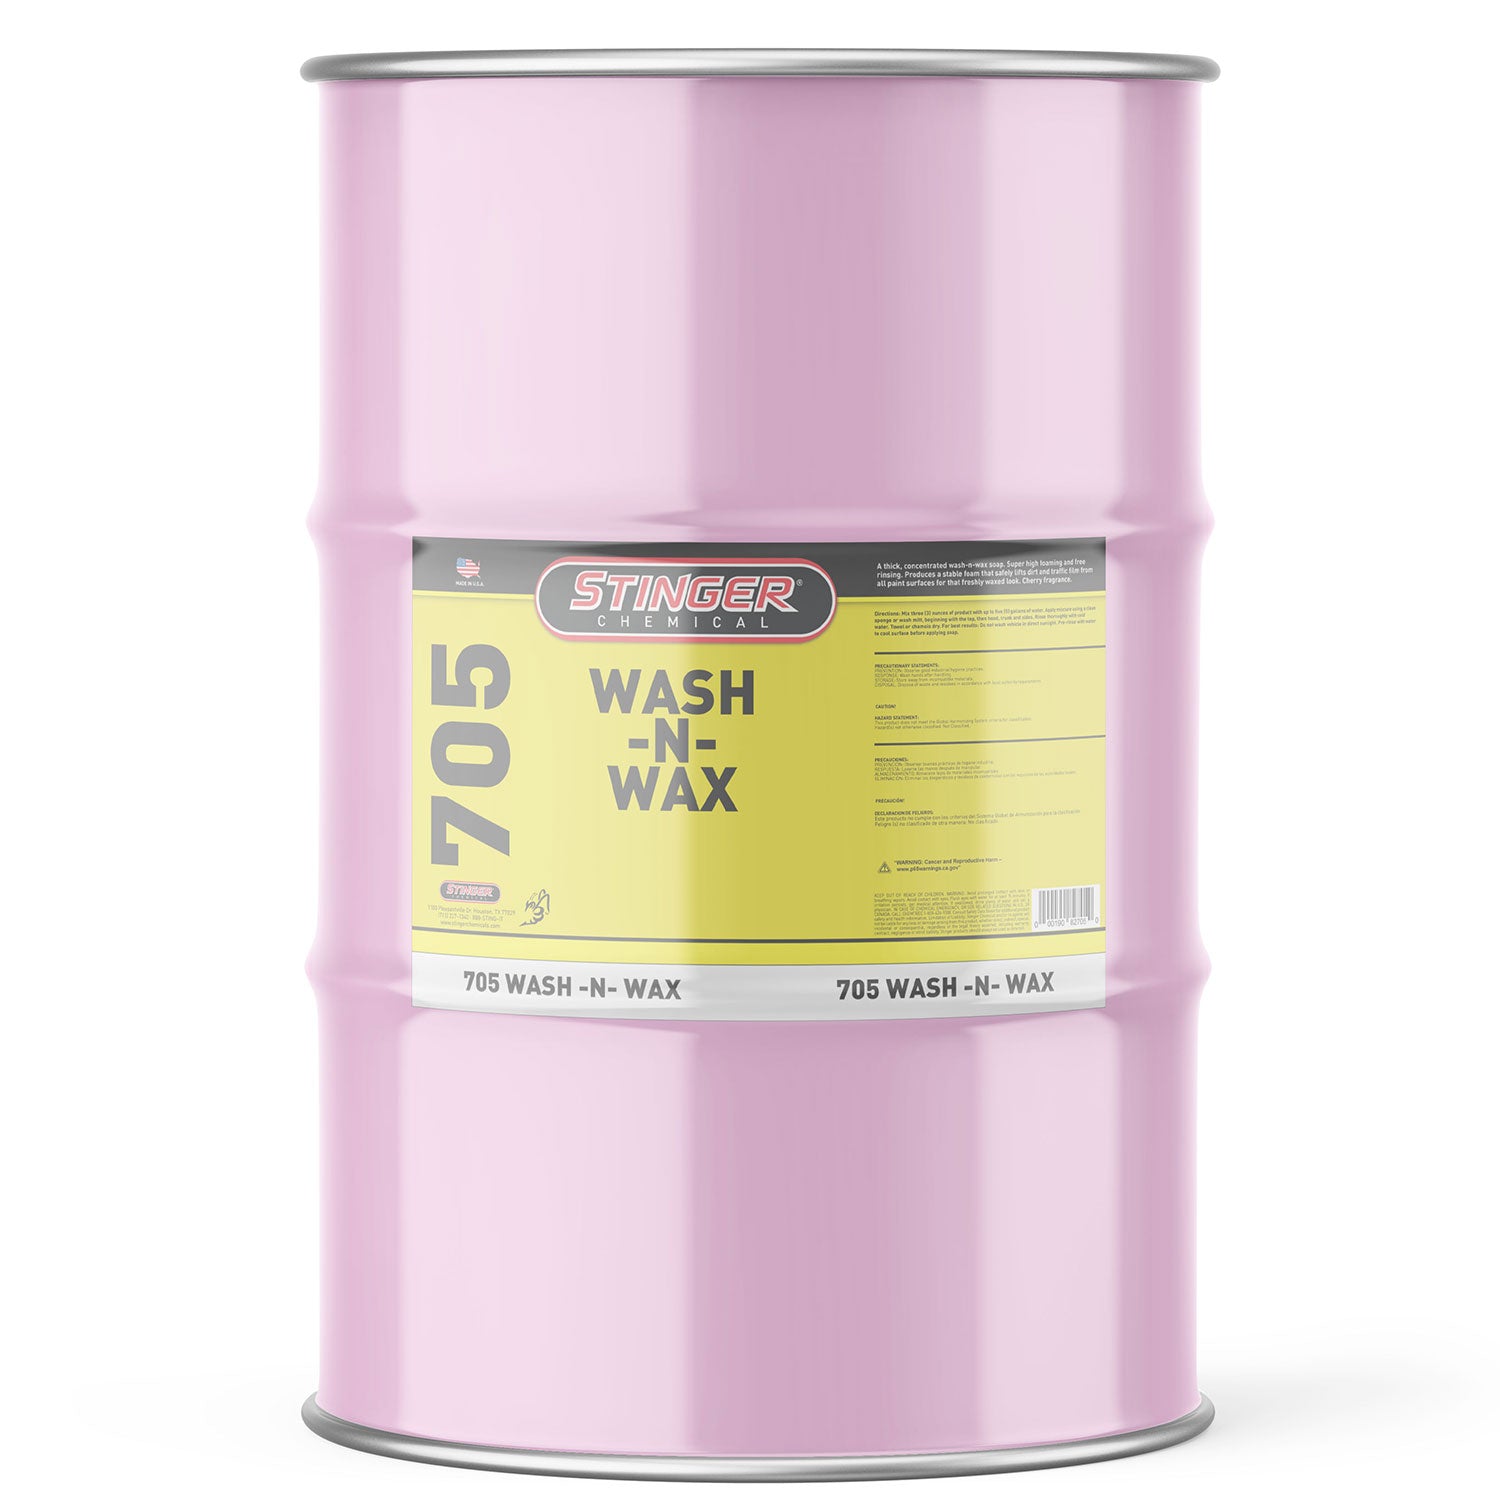 pink-wax-soap-in-a-single-plastic-55-gallon-drum-container-with-lid